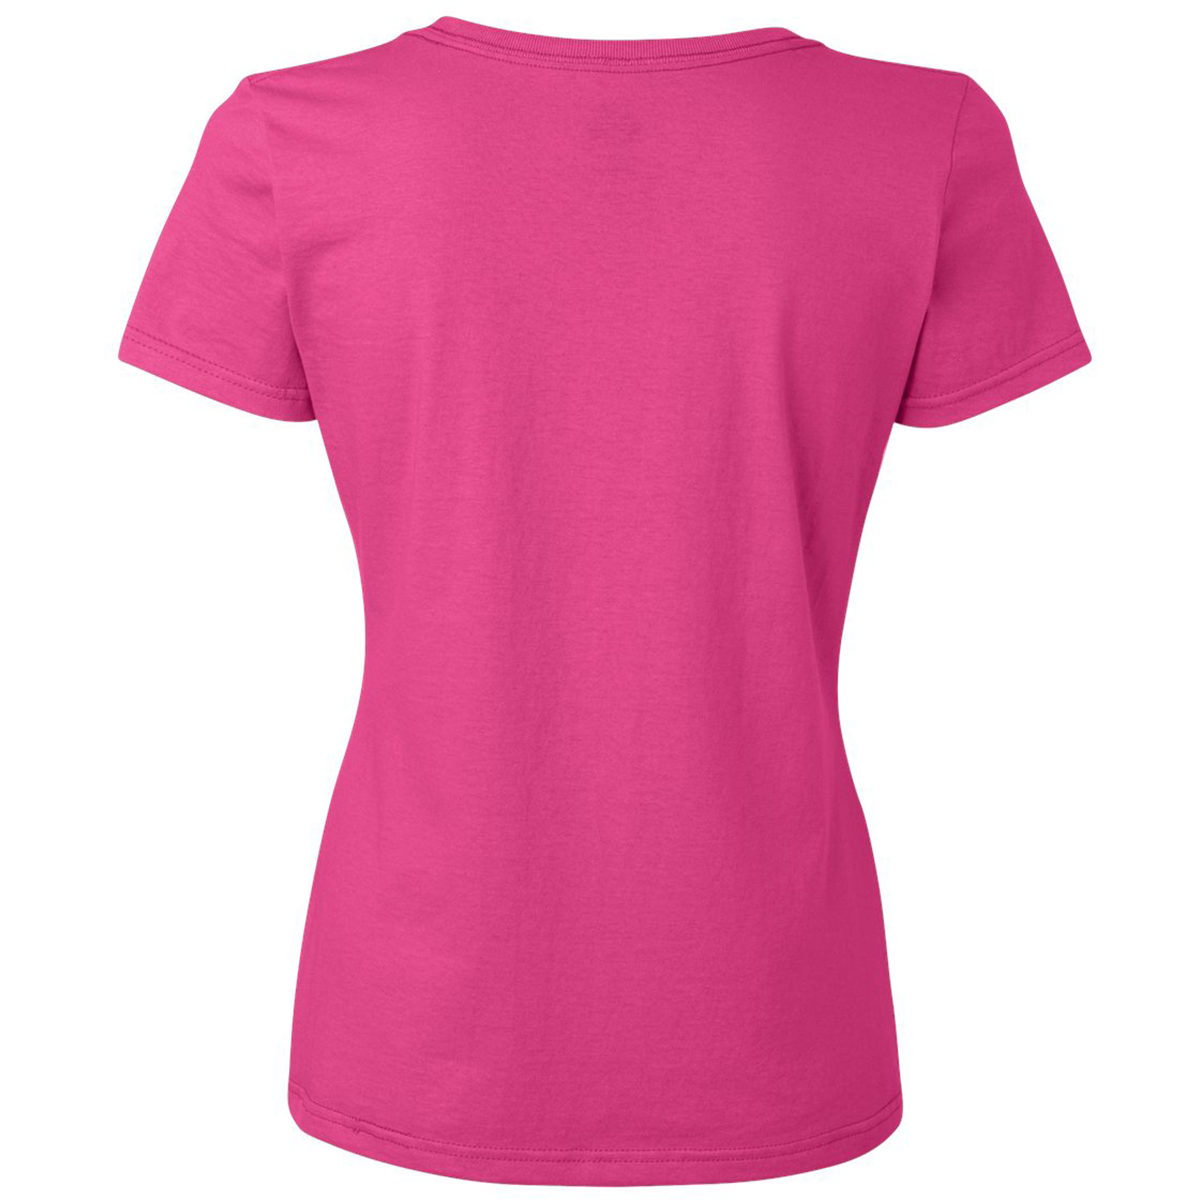 Inktastic Surfing Gift for Surfer Women's T-Shirt - image 4 of 4